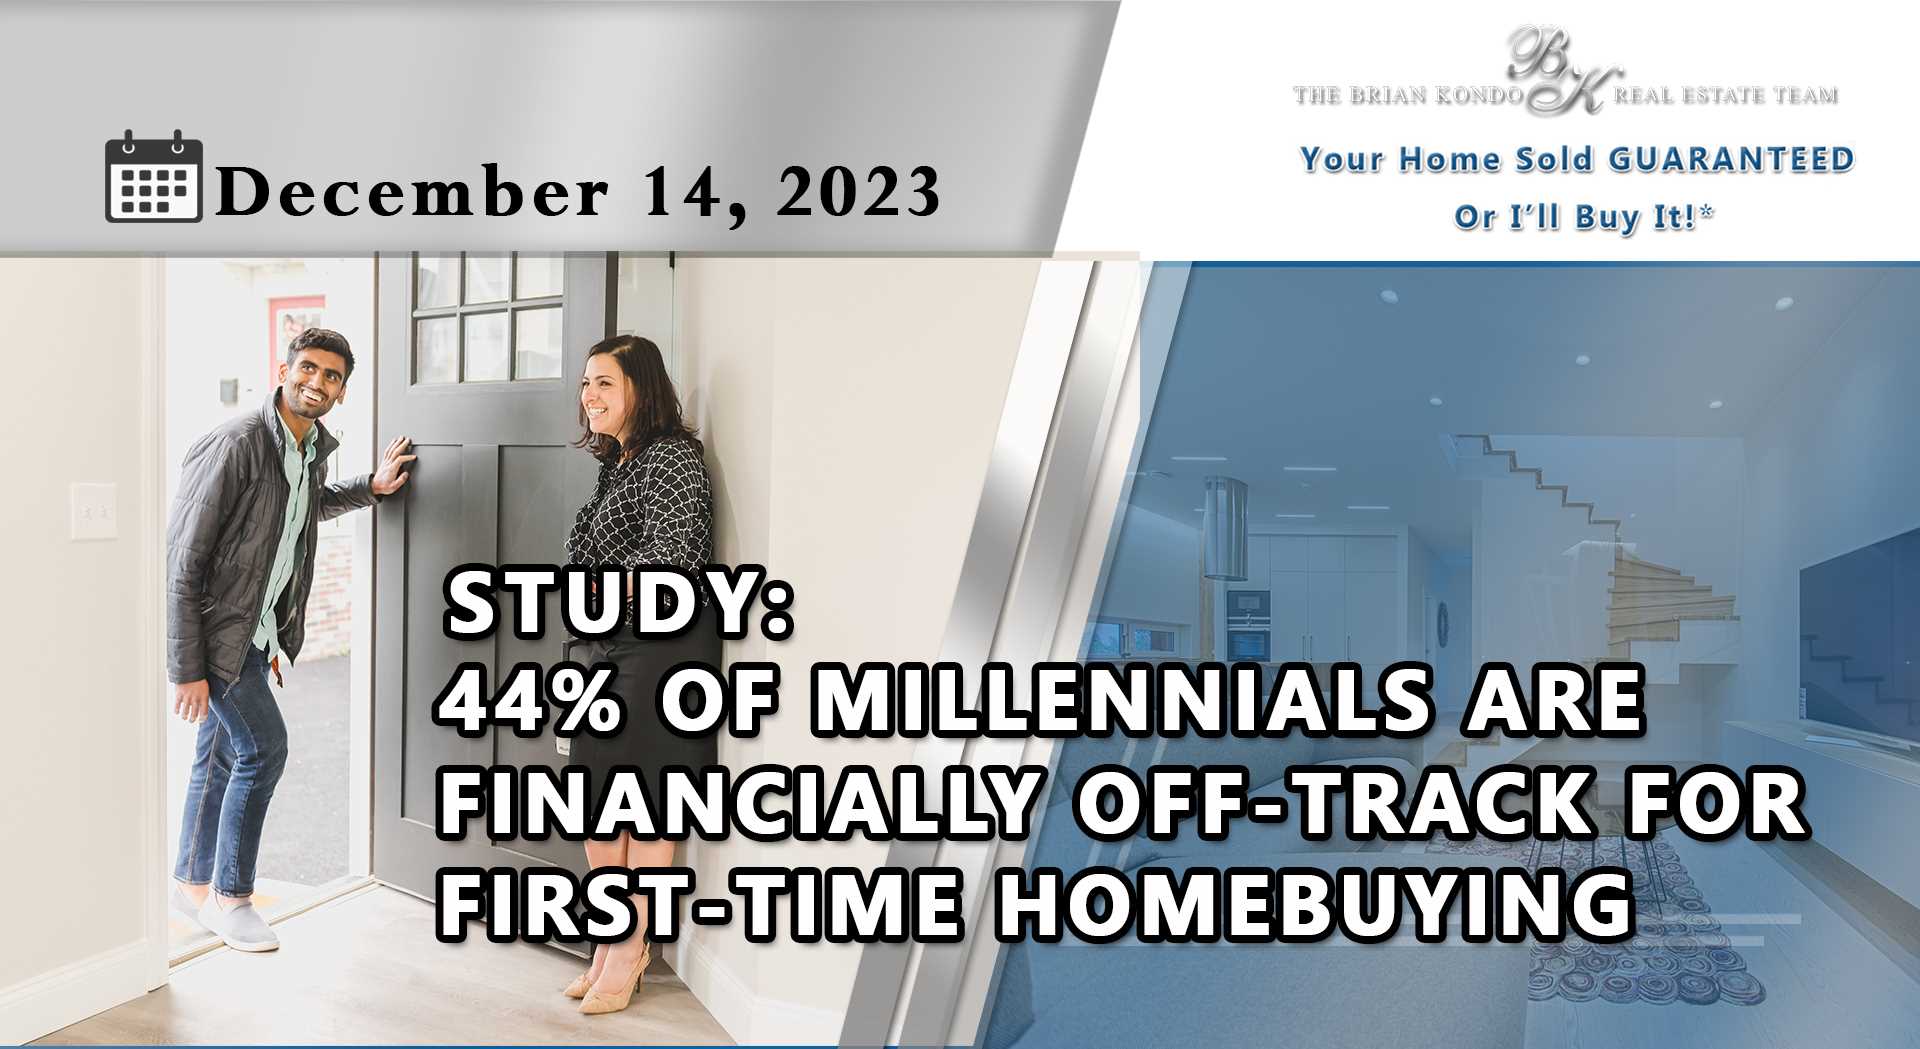 STUDY: 44% OF MILLENNIALS ARE FINANCIALLY OFF-TRACK FOR FIRST-TIME HOMEBUYING